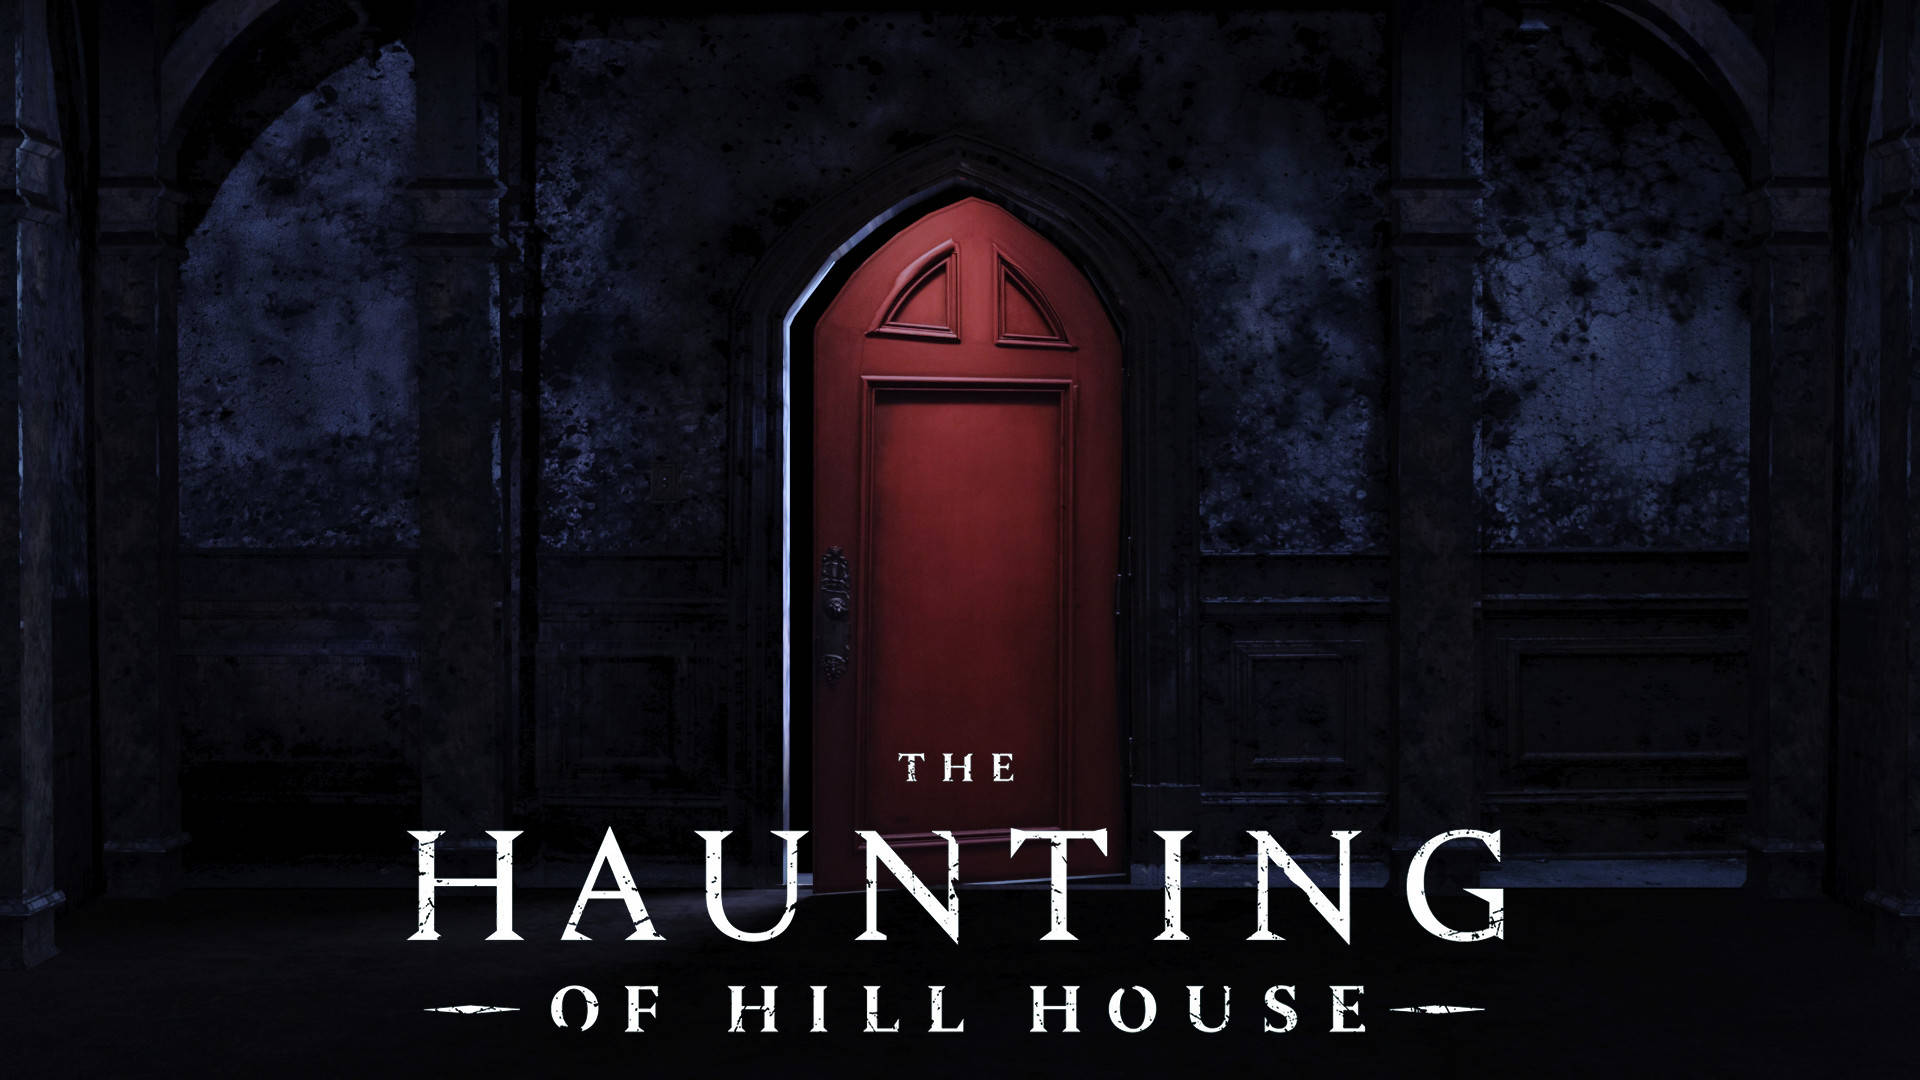 The Haunting Of Hill House Red Door Background